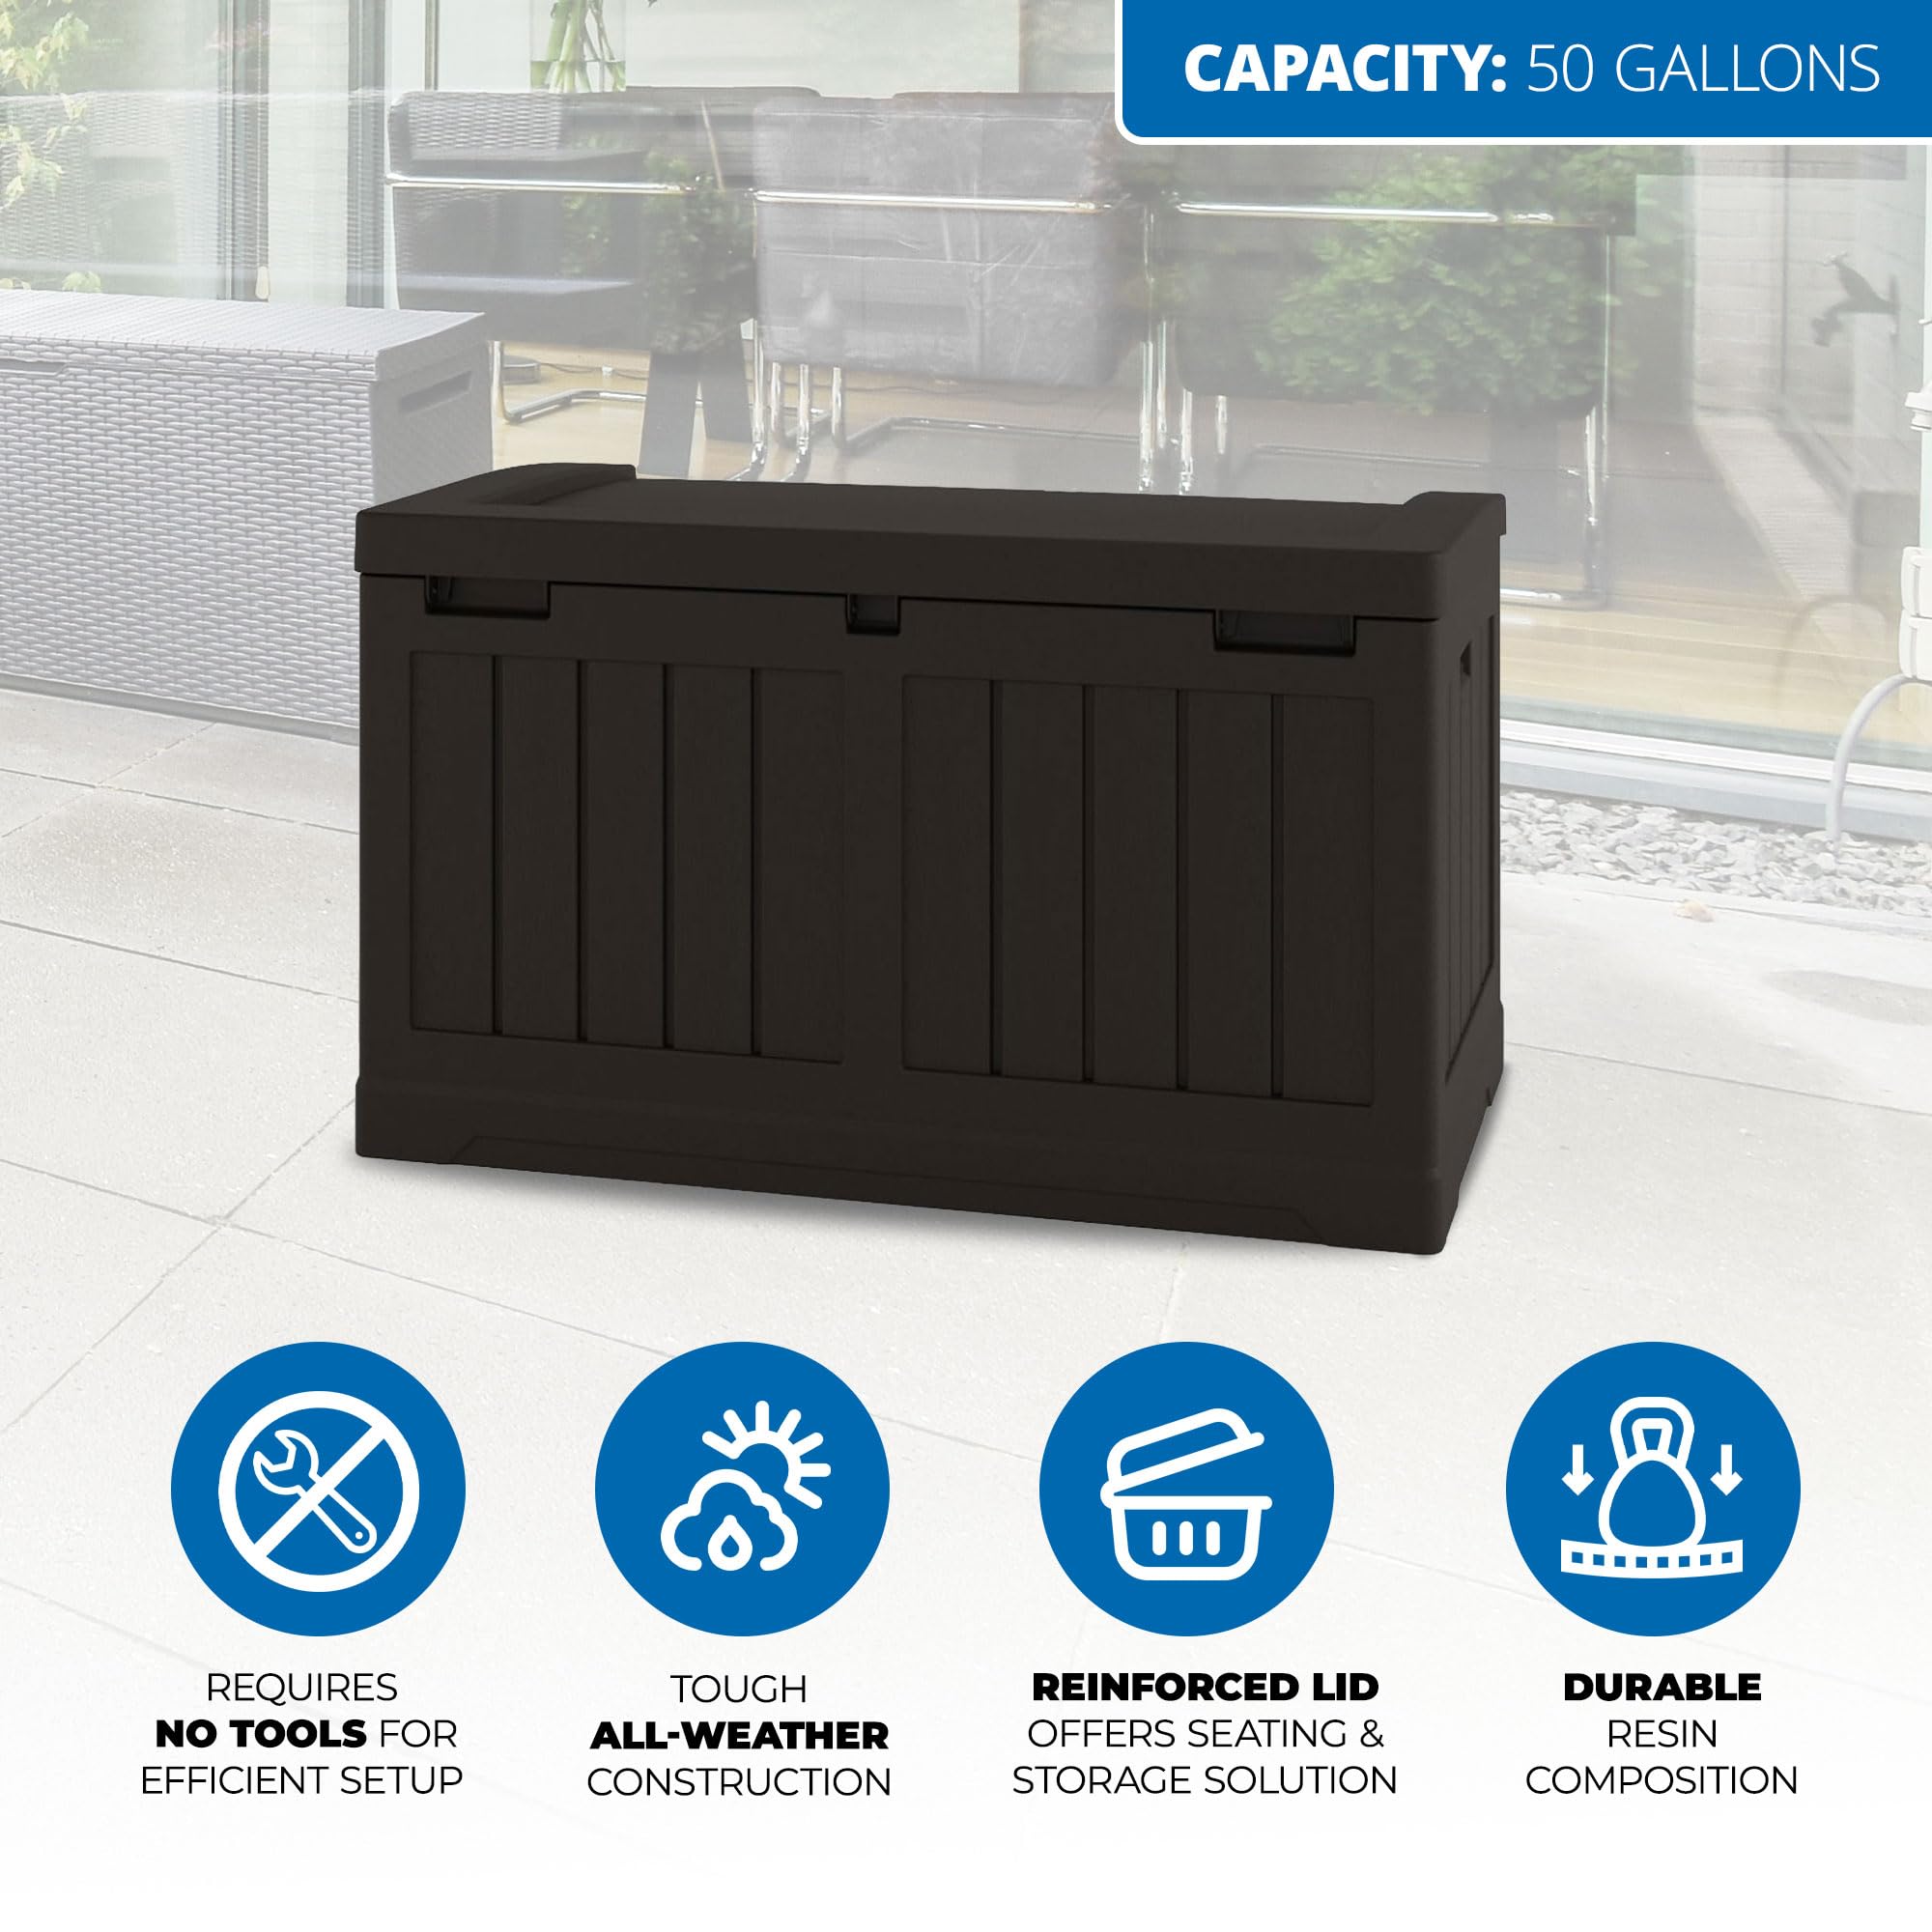 Suncast 50 Gallon Medium Capacity All Weather Construction Resin Outdoor Storage Deck Box with Bench Seat and Lid for Patio, Garden, or Pool, Java